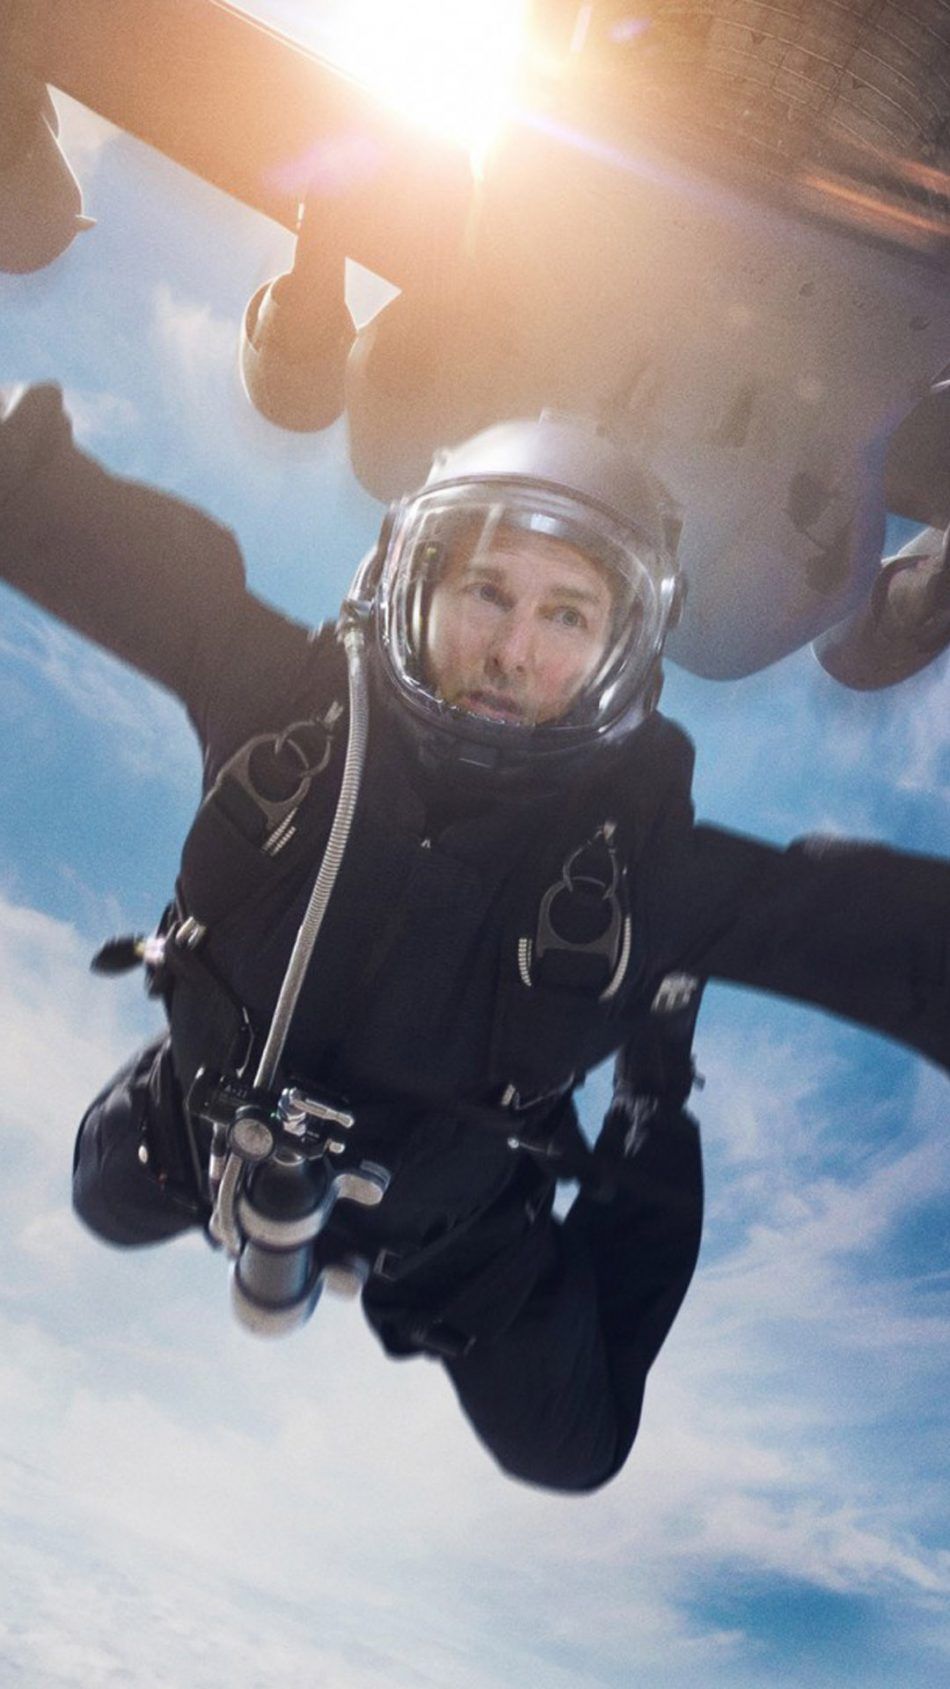 Tom Cruise Skydiving Mission Impossible Fallout Free 4K Ultra HD